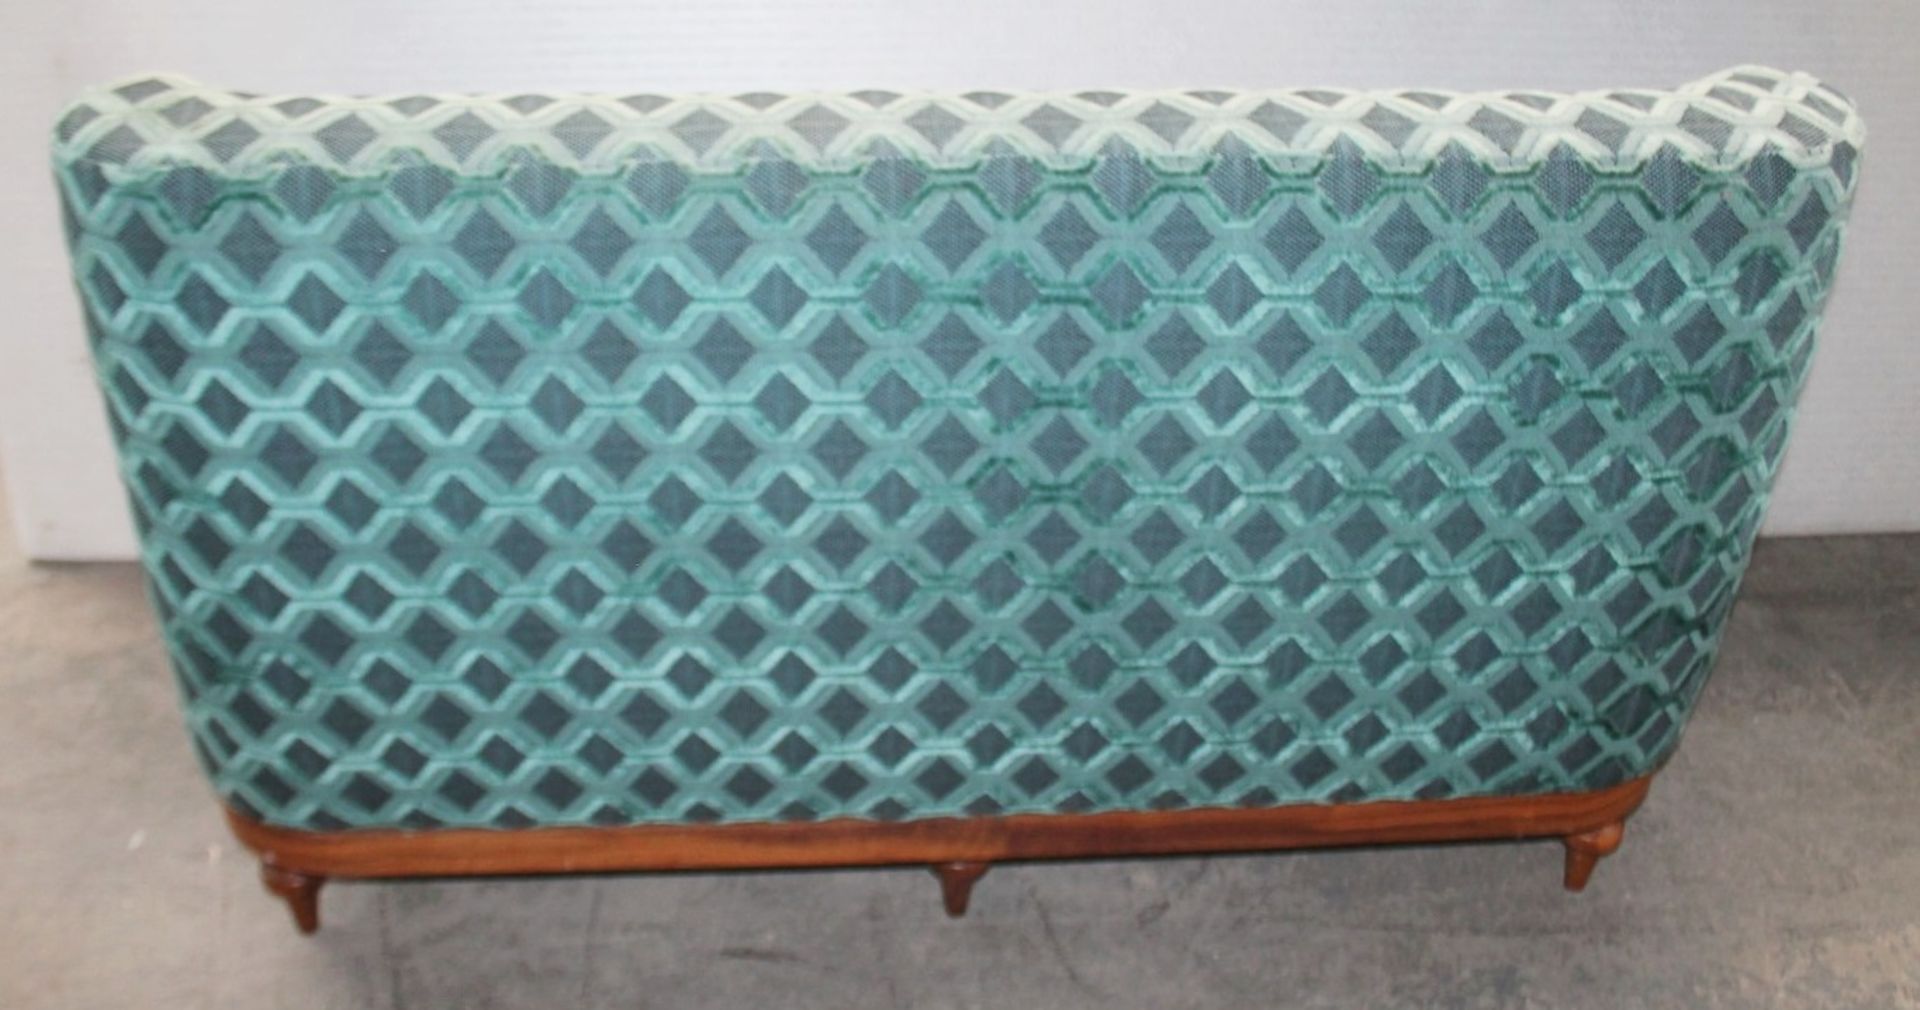 1 x Commercial Freestanding 2-Seater Booth Seating Sofa, Upholstered In Premium Teal Fabrics - Image 3 of 8